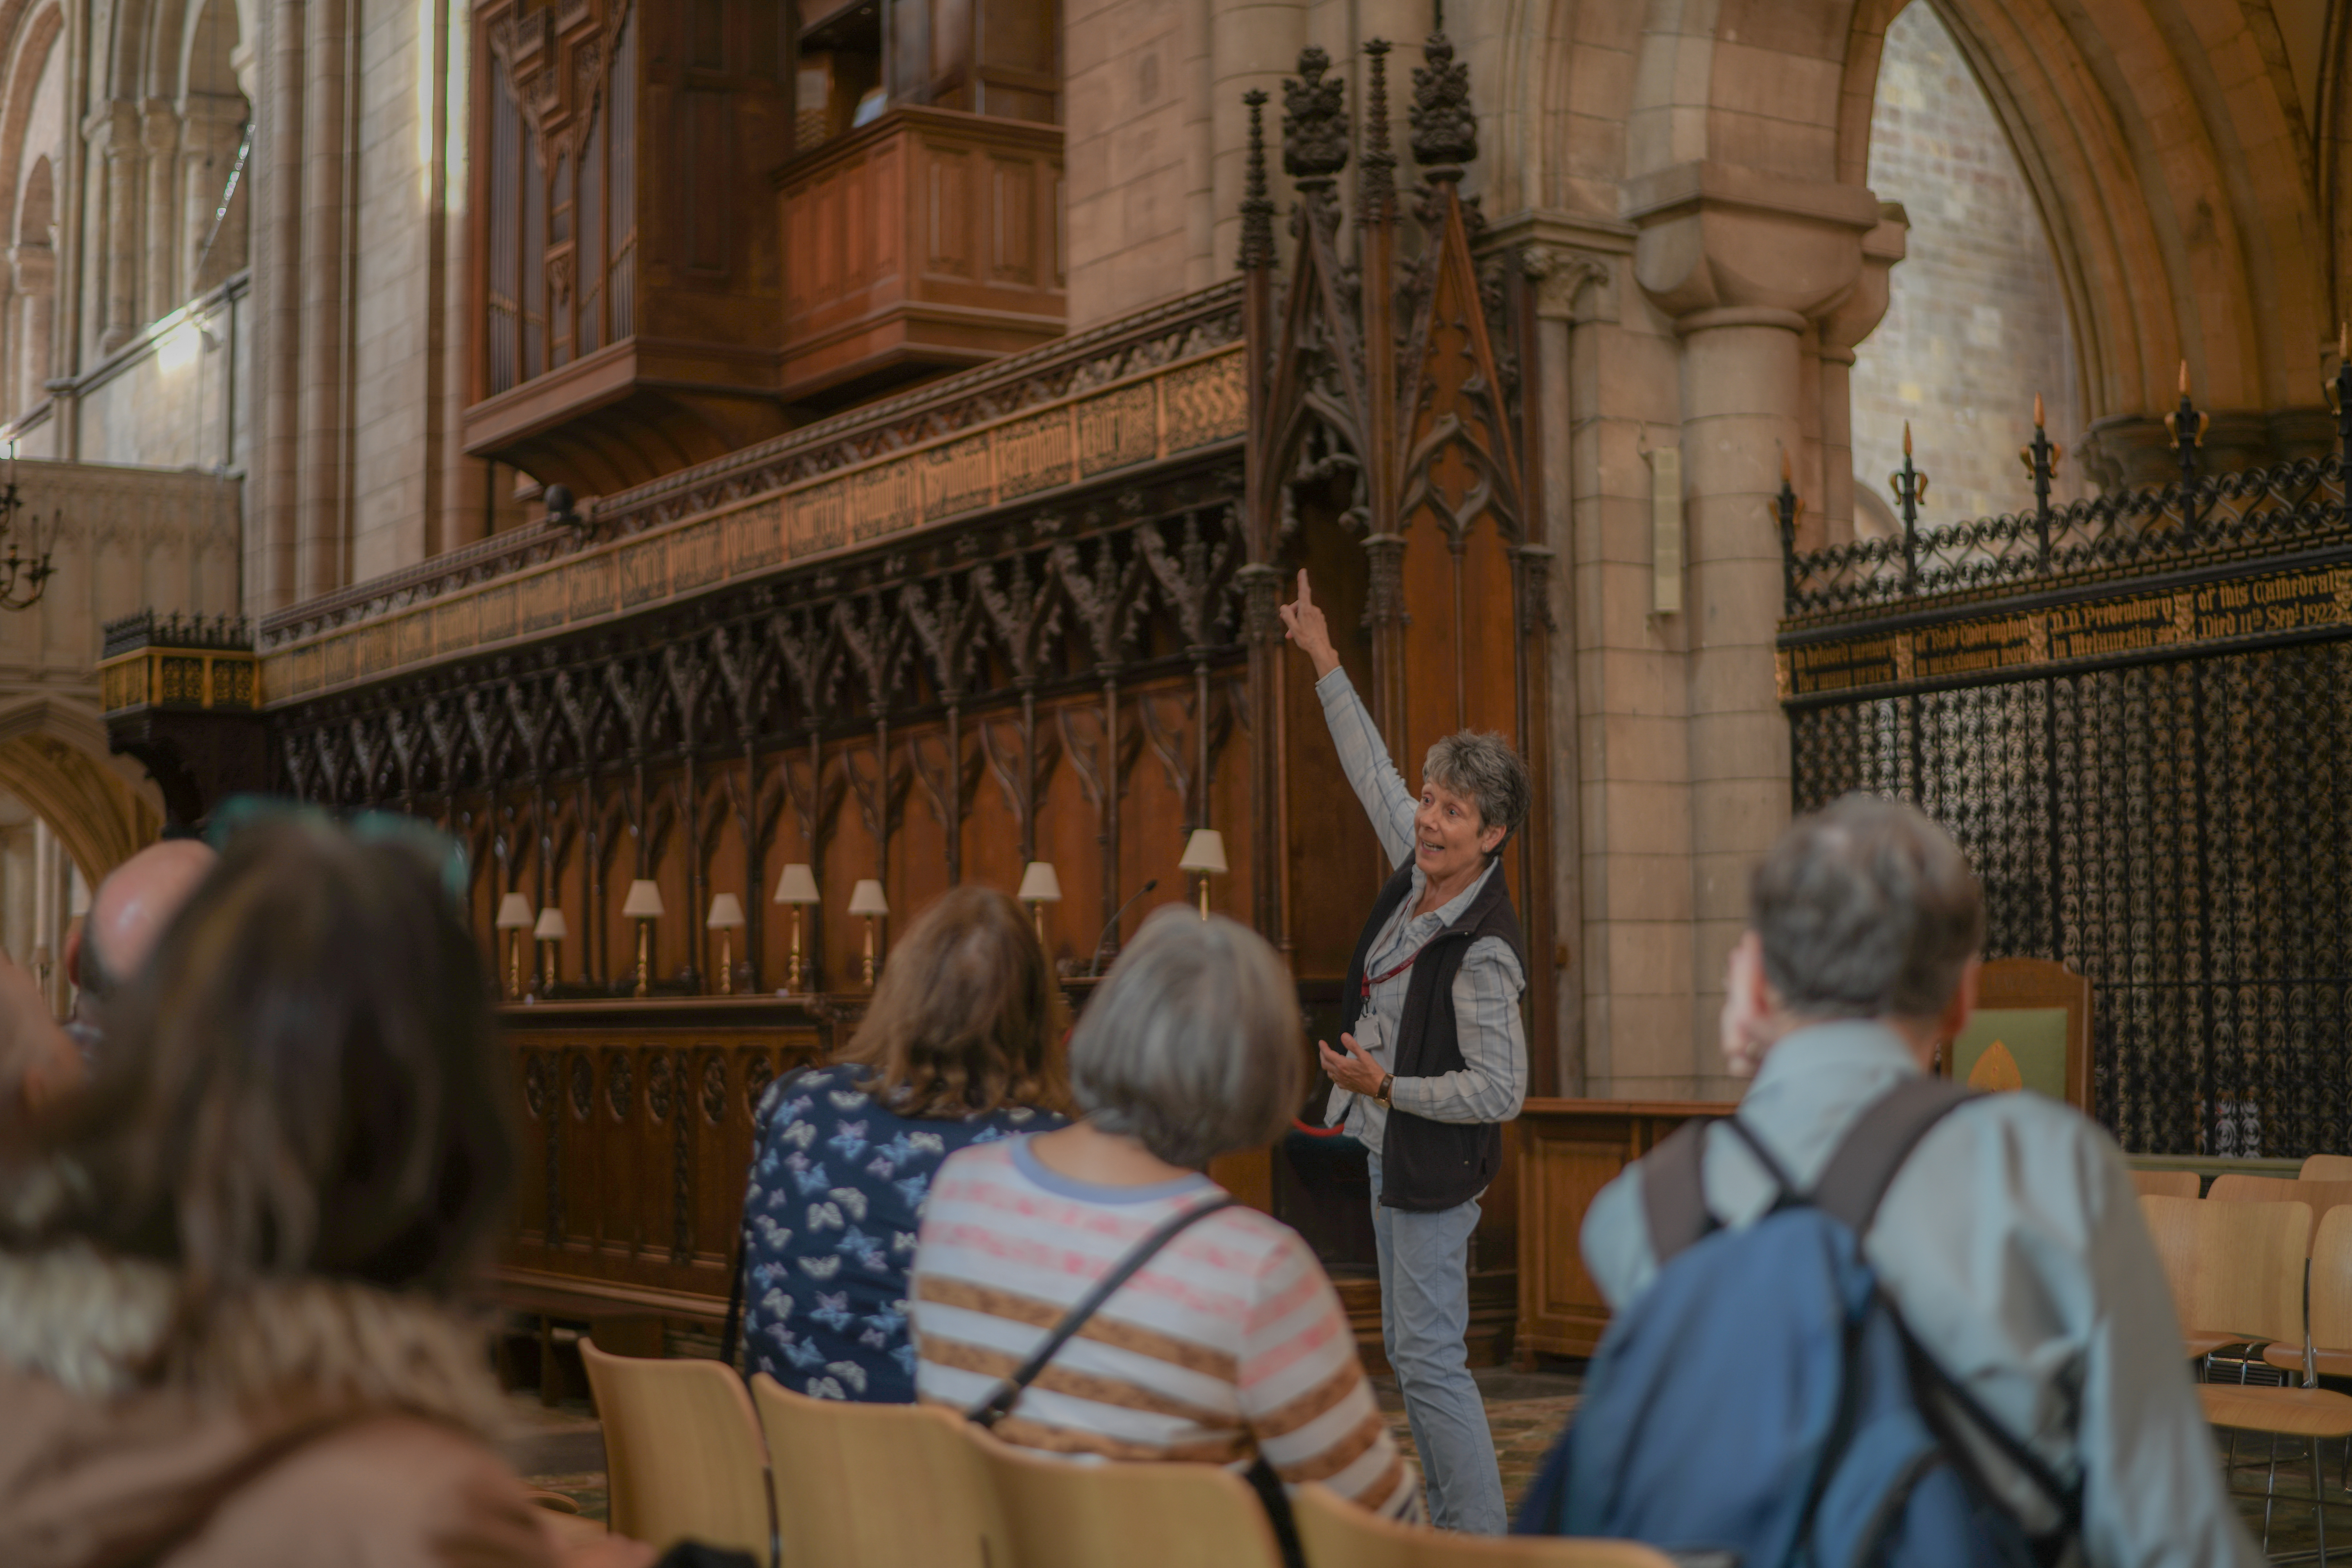 A volunteer guide points to the Quire with a large group